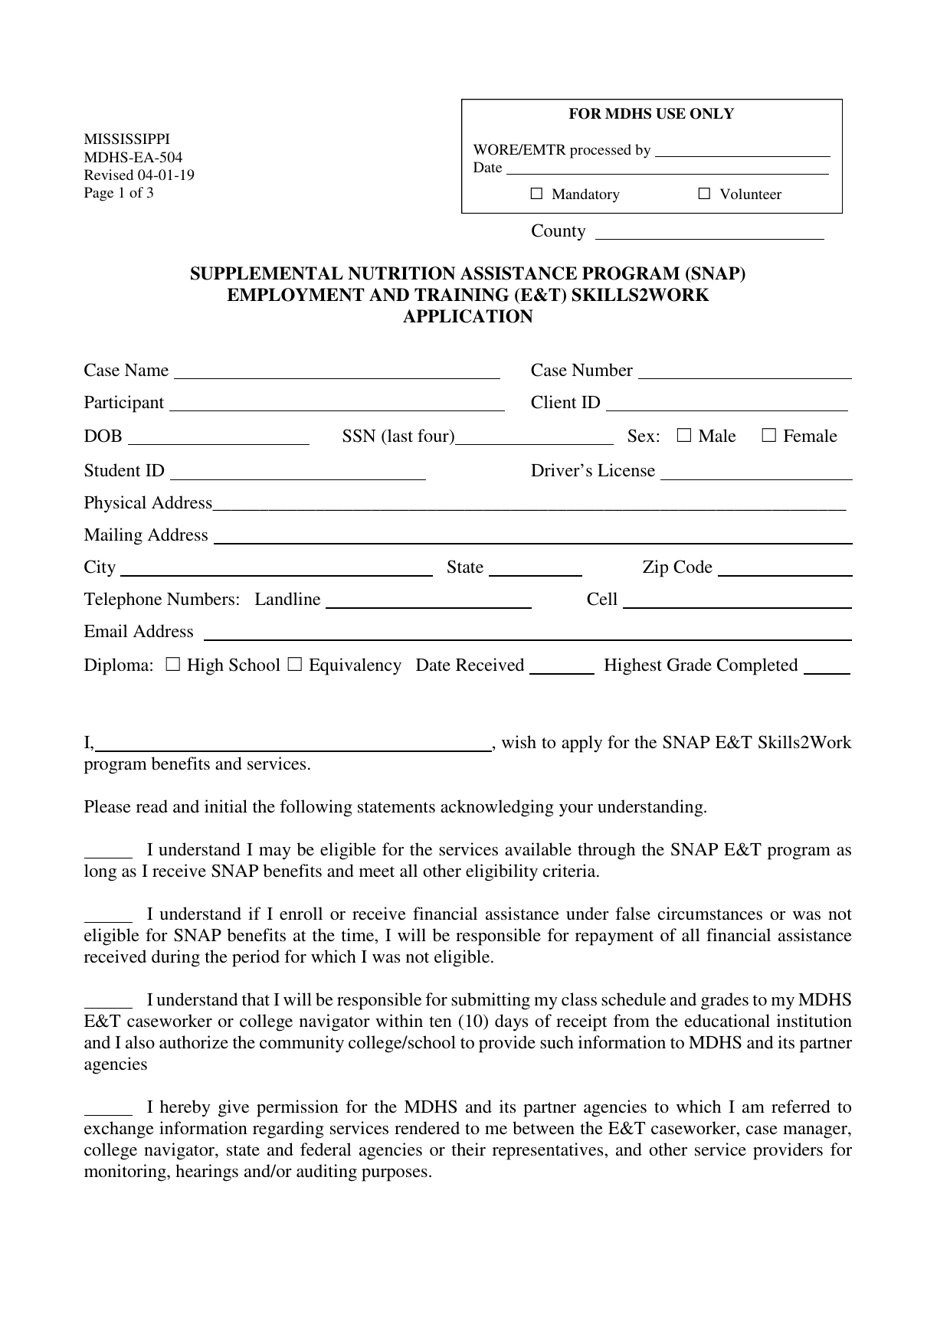 Form MDHS-EA-504 Supplemental Nutrition Assistance Program (Snap) Employment and Training (Et) Skills2work Application - Mississippi, Page 1